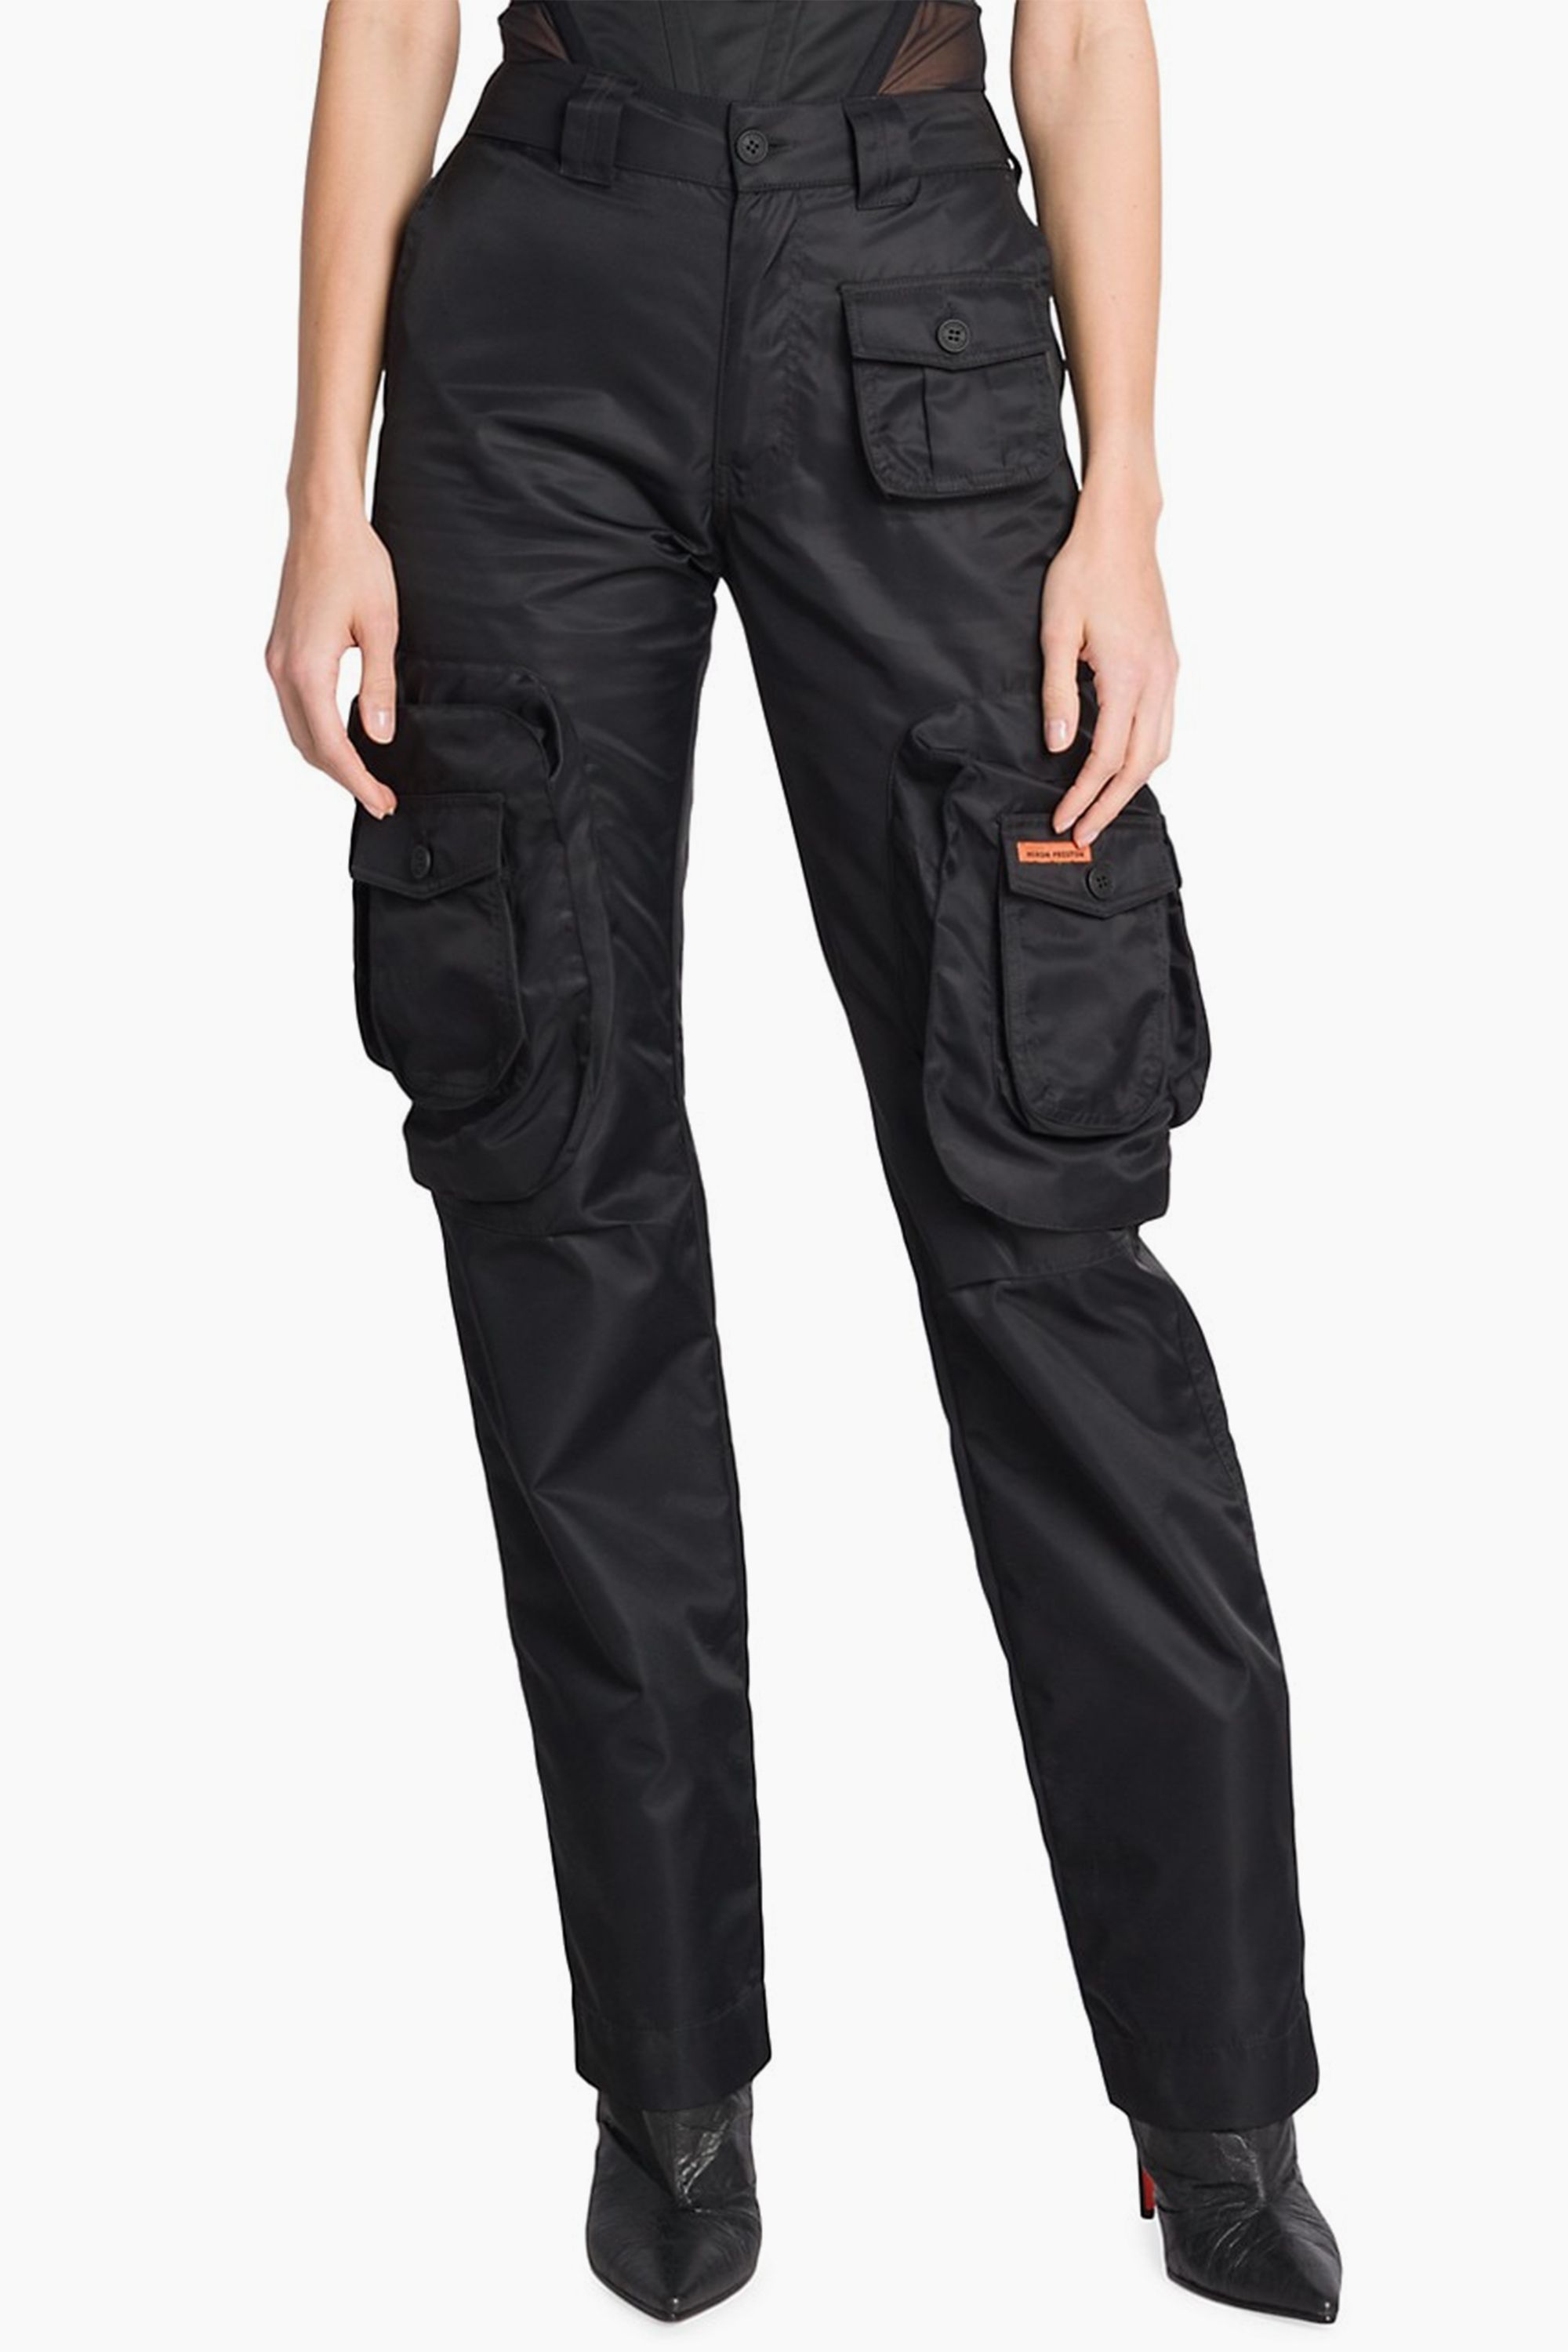 High Star Navy Regular Fit Stretchable Cargo Trousers